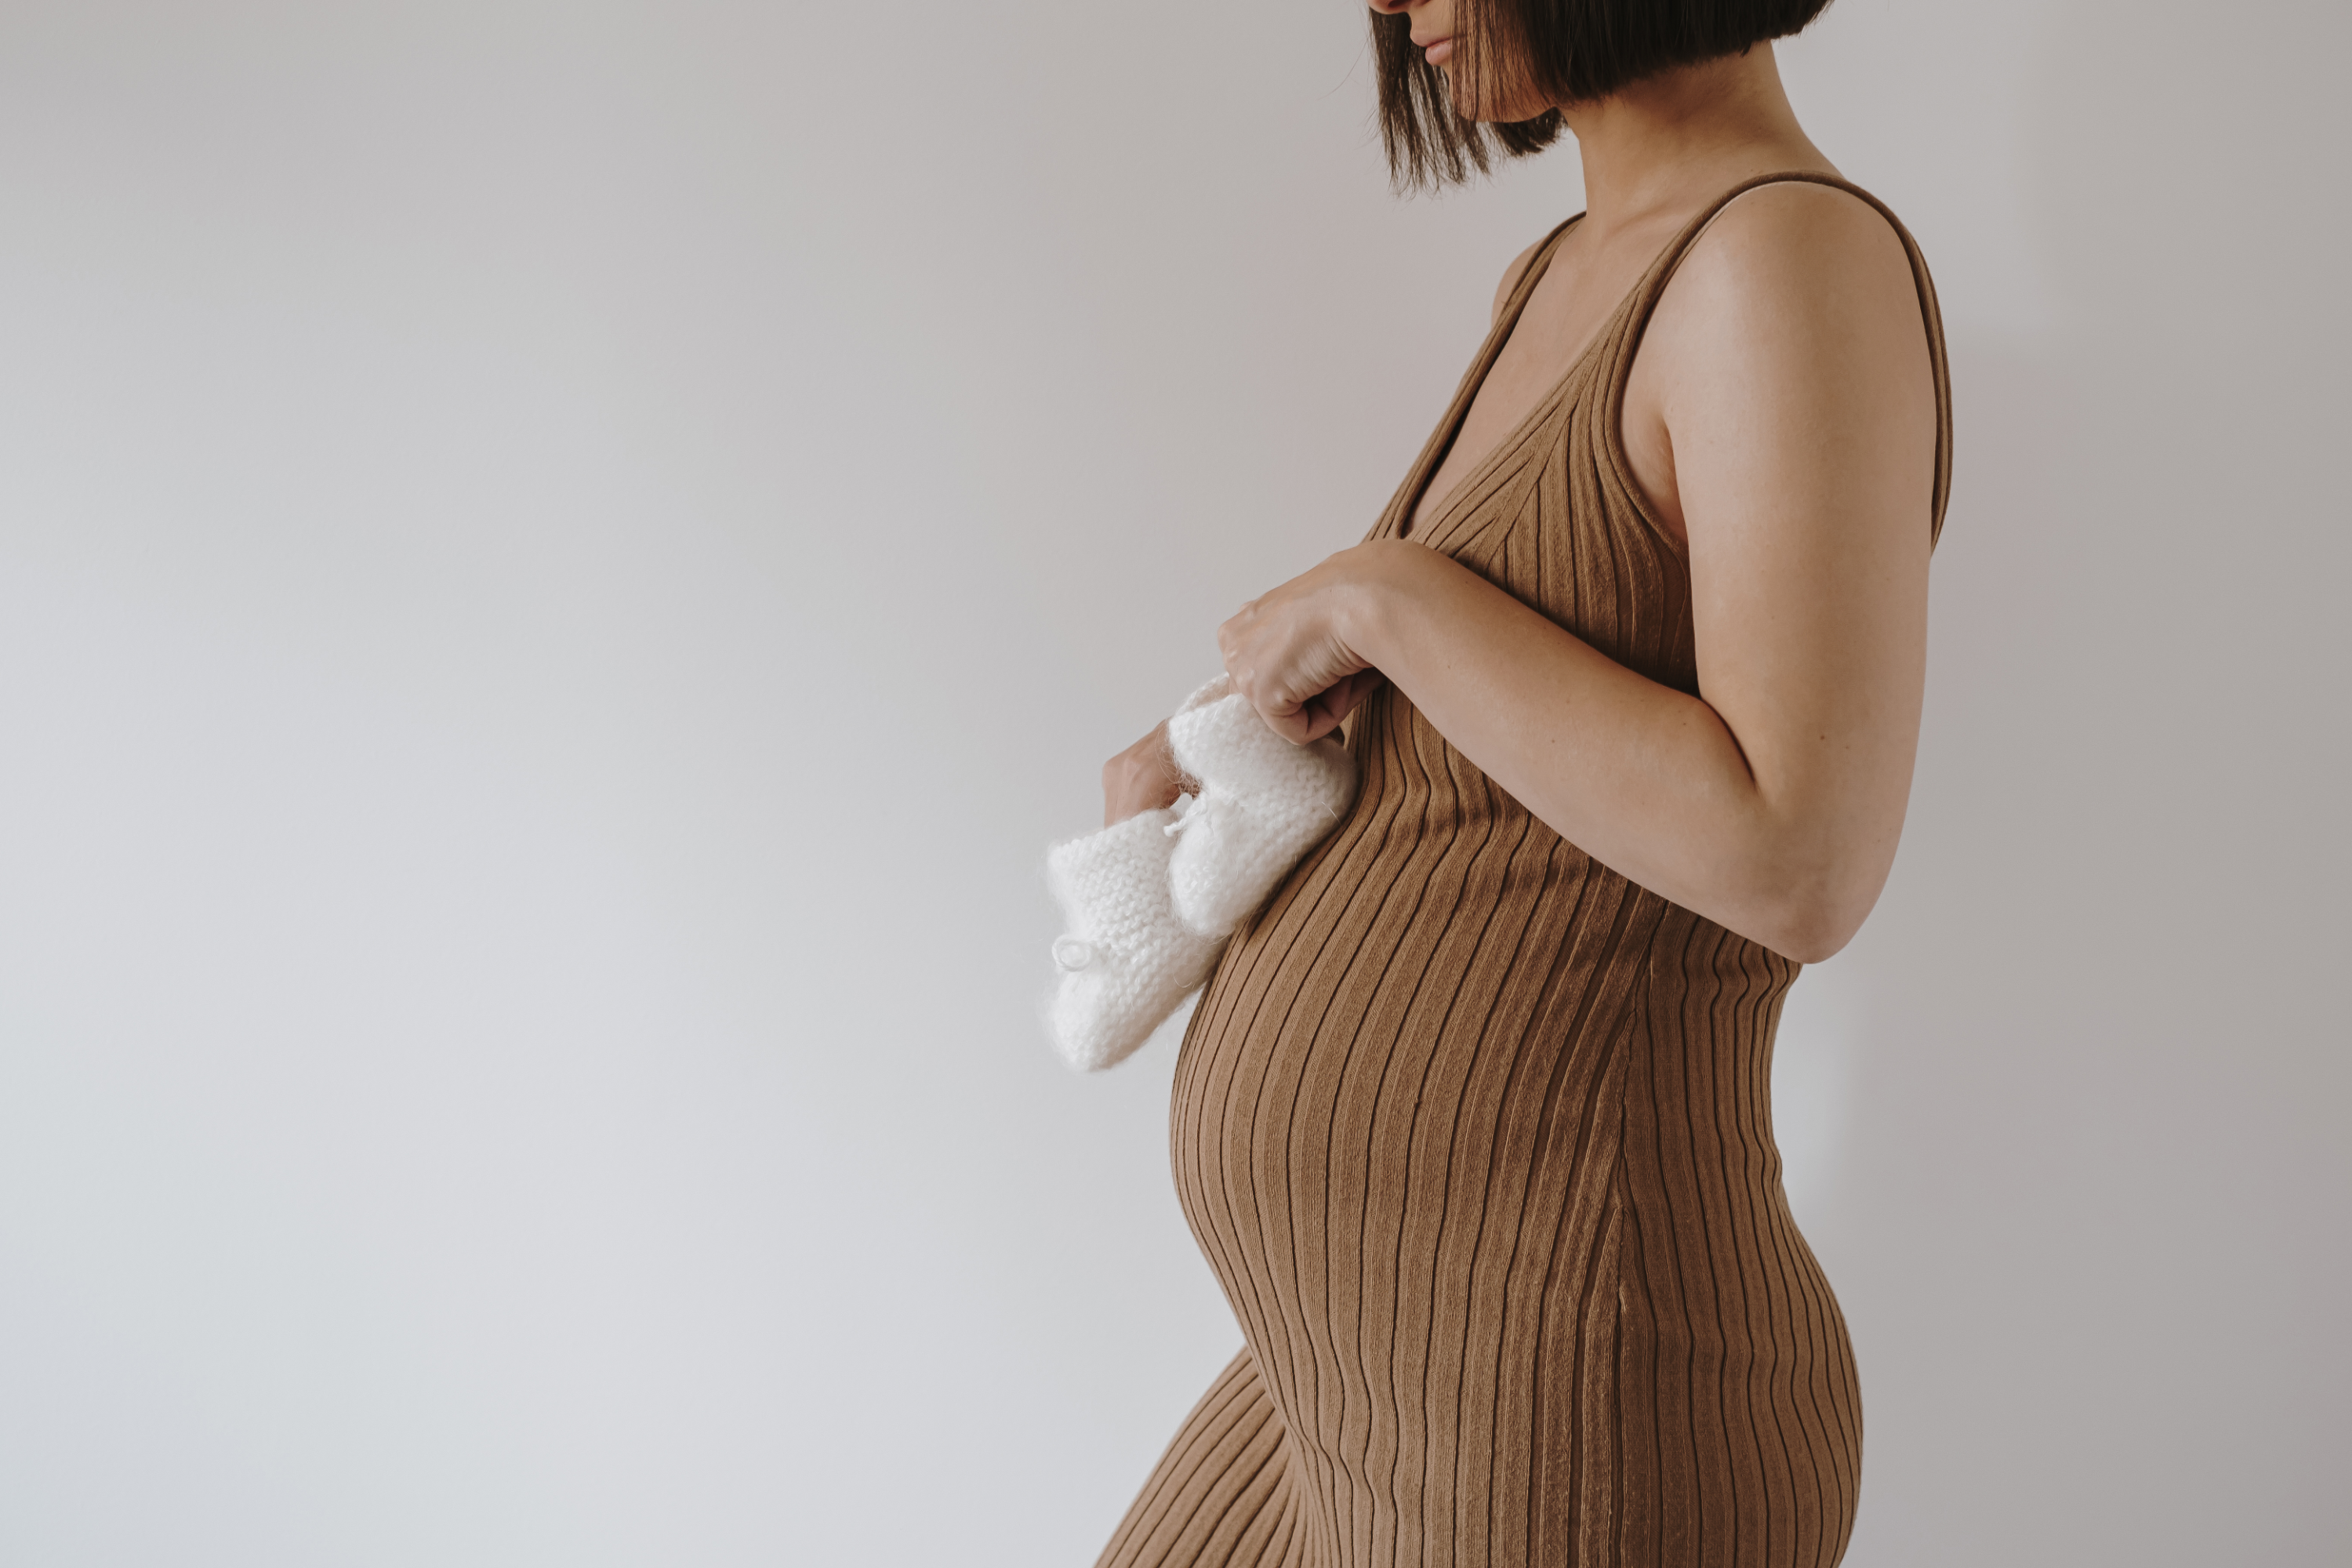 10 Chic Maternity Clothes You'll Love Wearing During Pregnancy